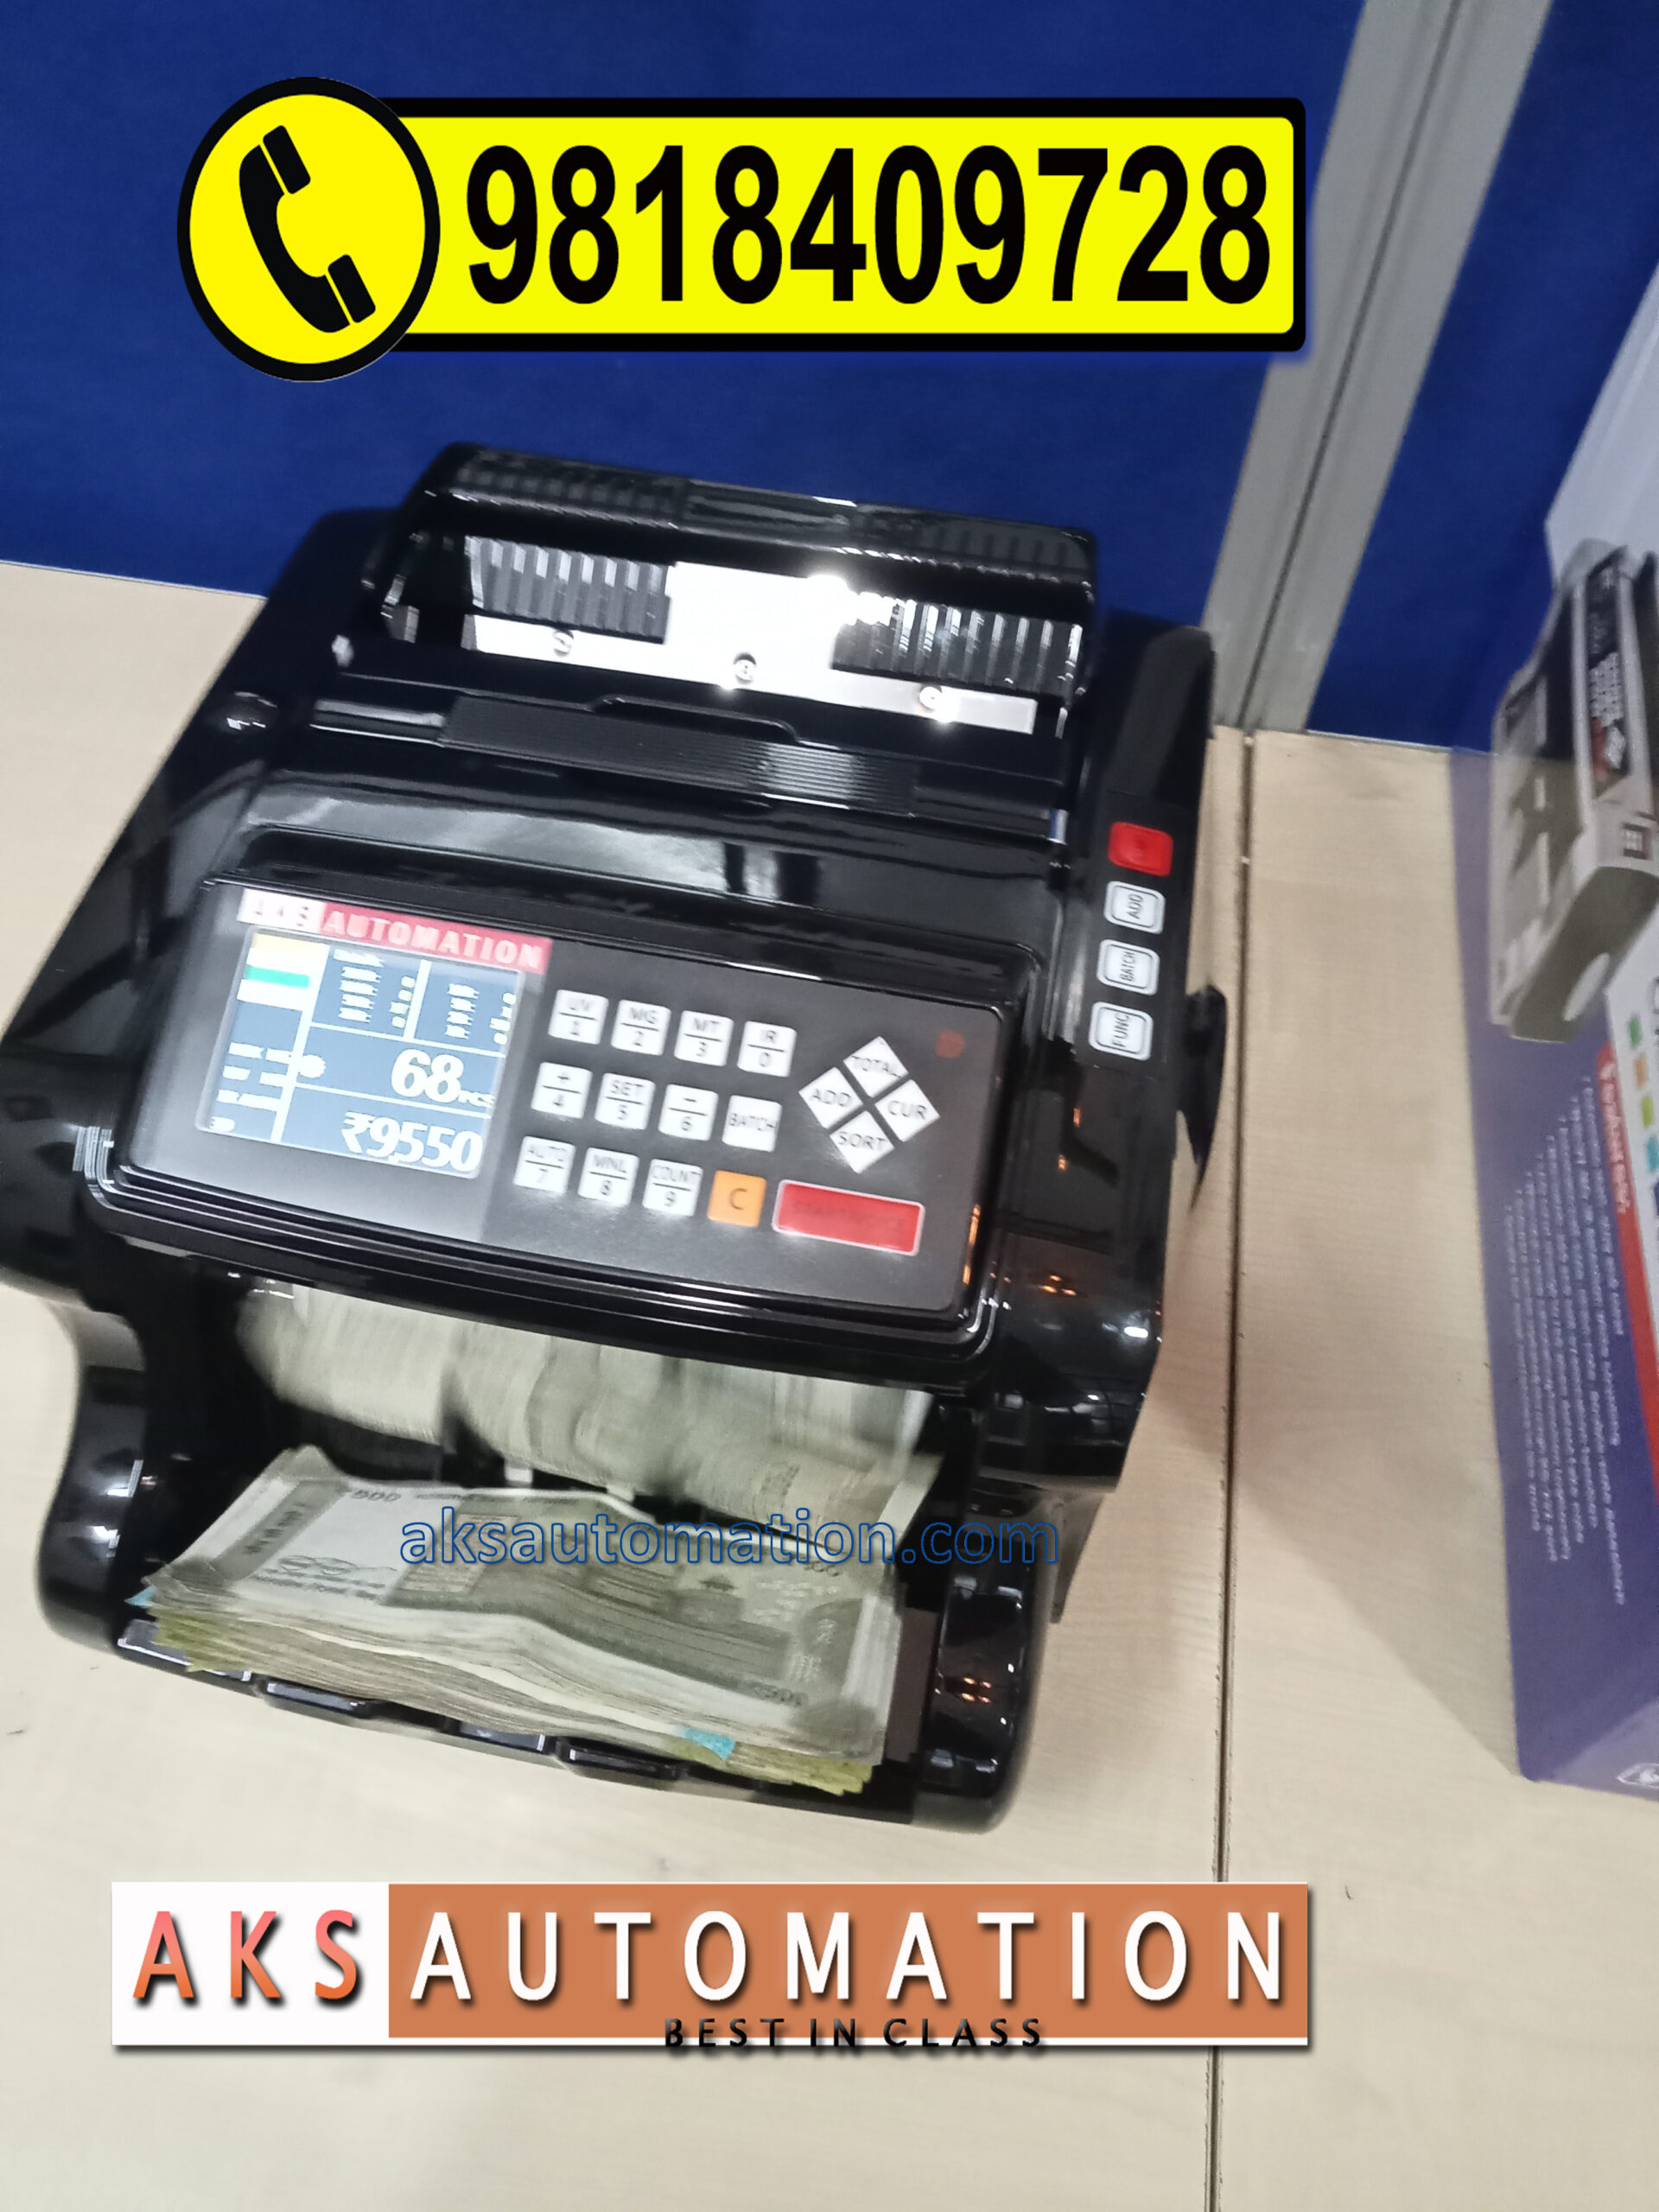 Mix Note Counting Machine in Delhi